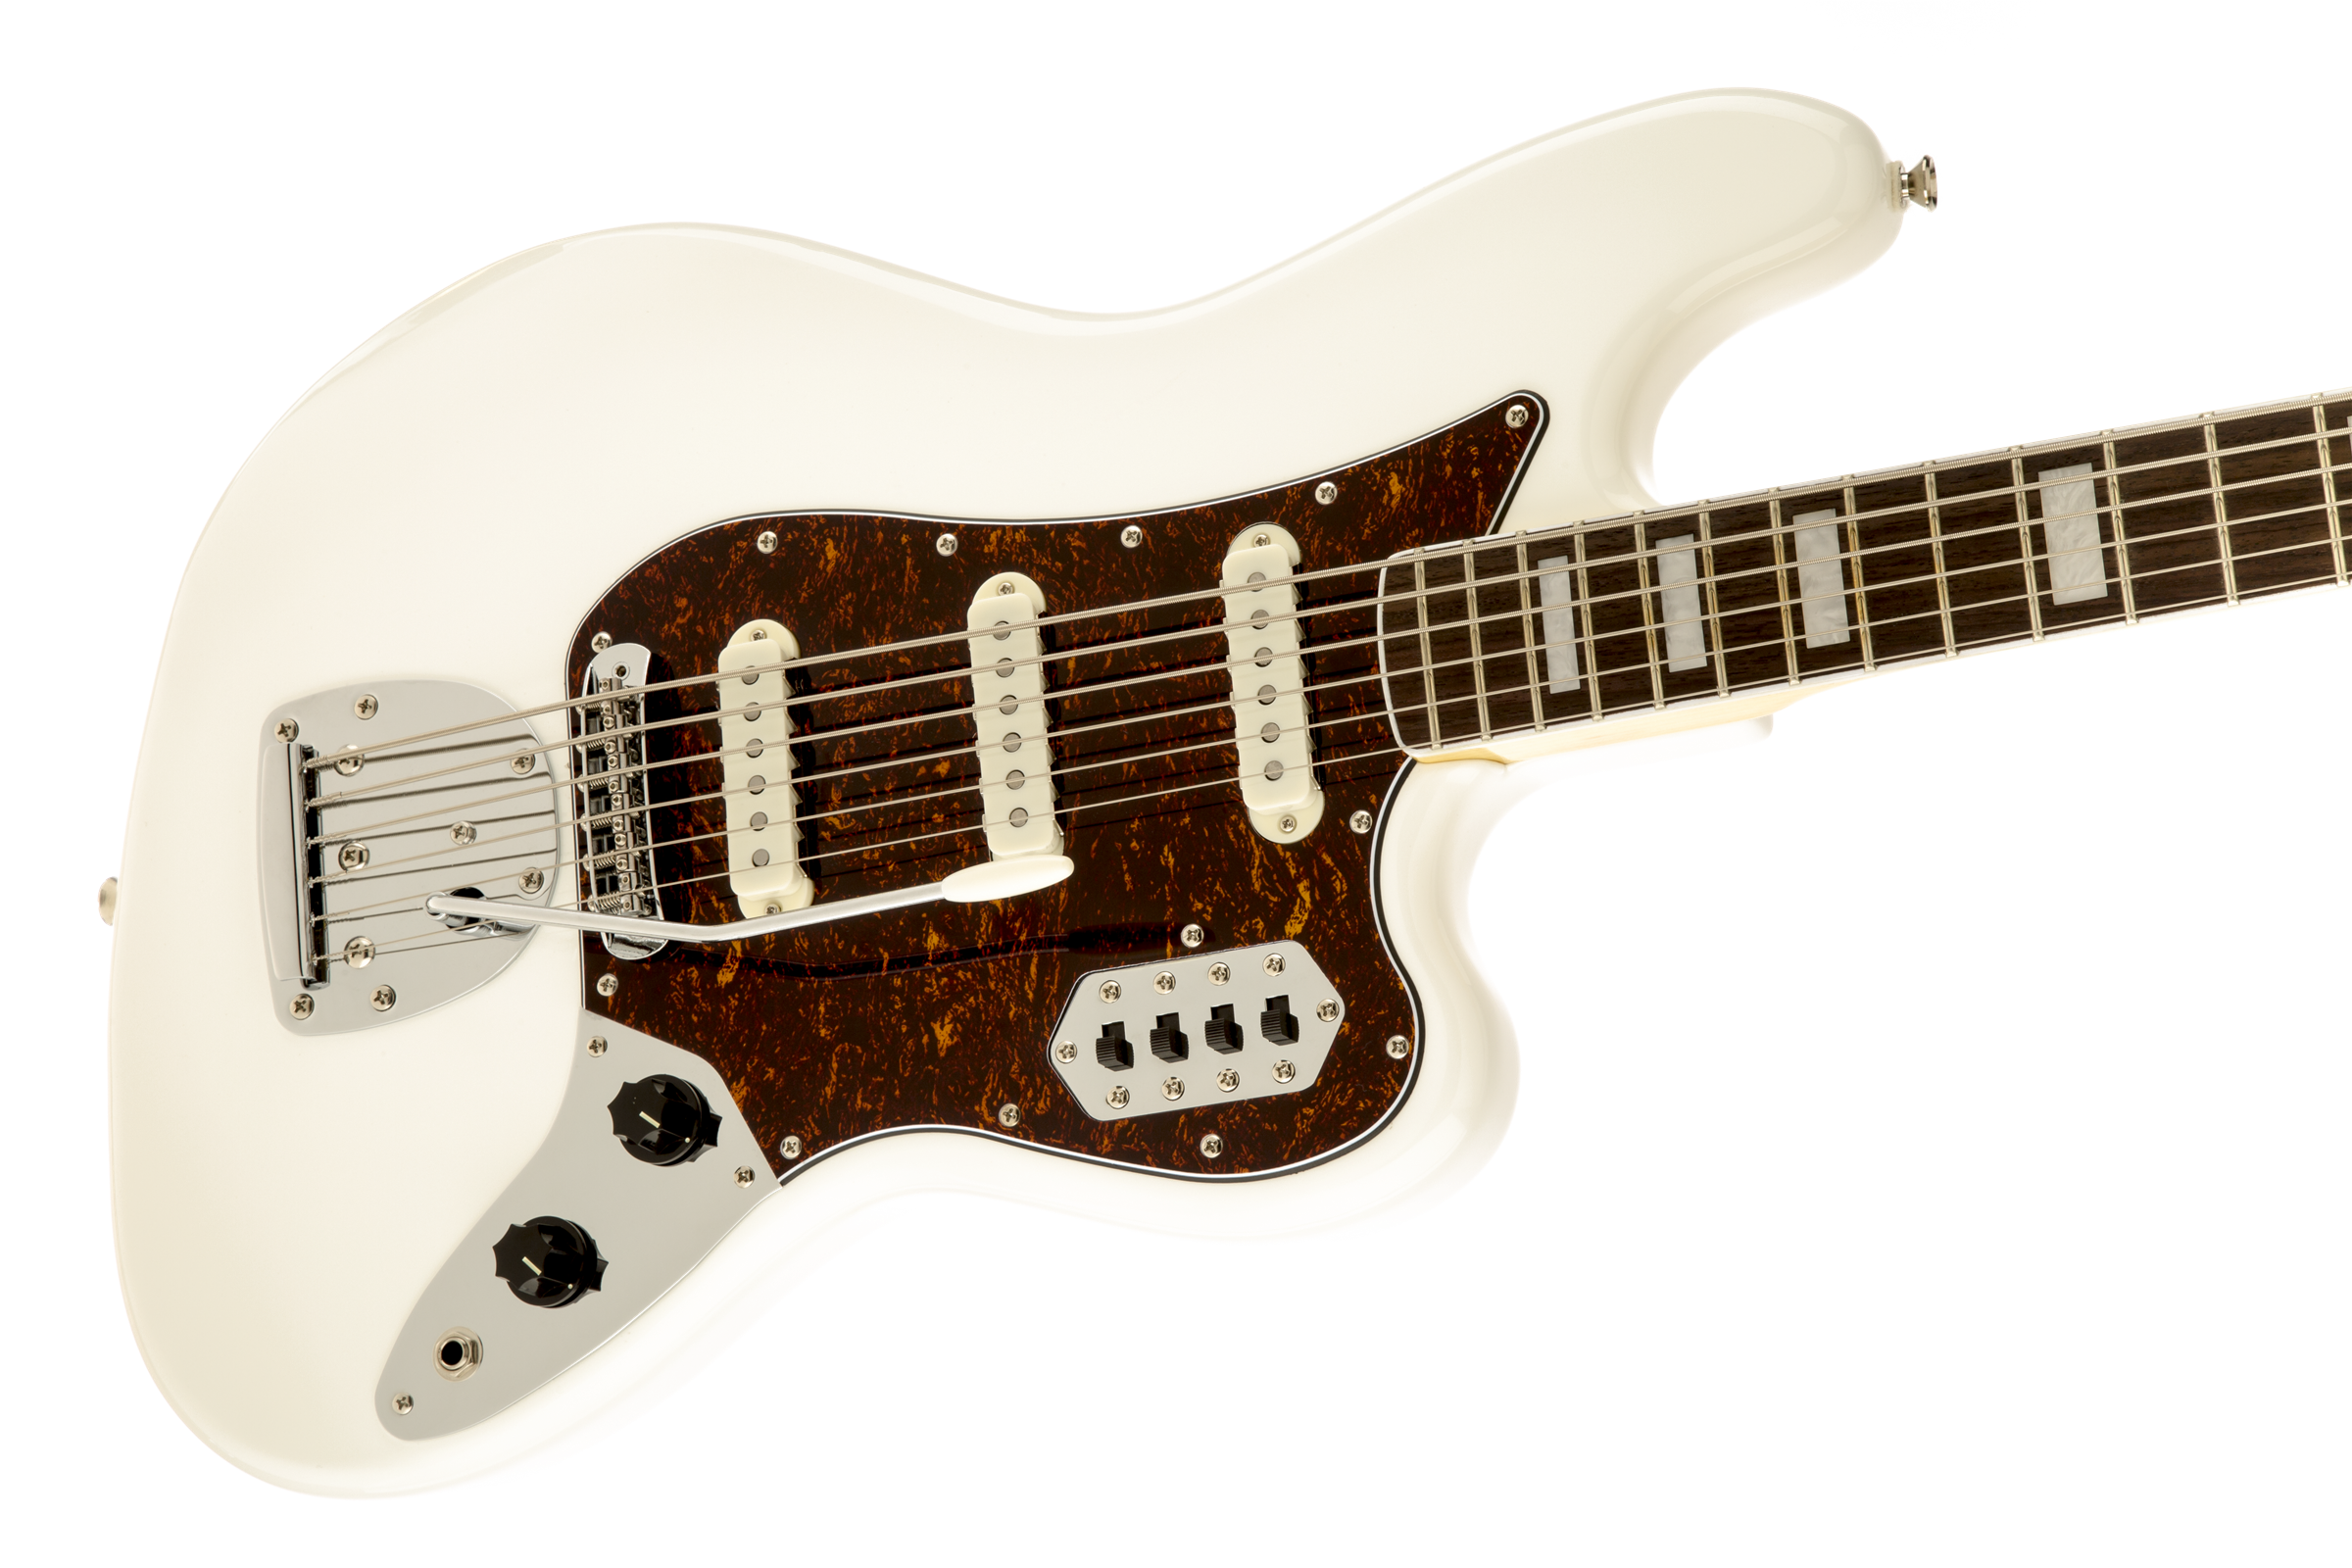 Squier Bass Vi Vintage Modified (rw) - Olympic White - Solid body electric bass - Variation 2